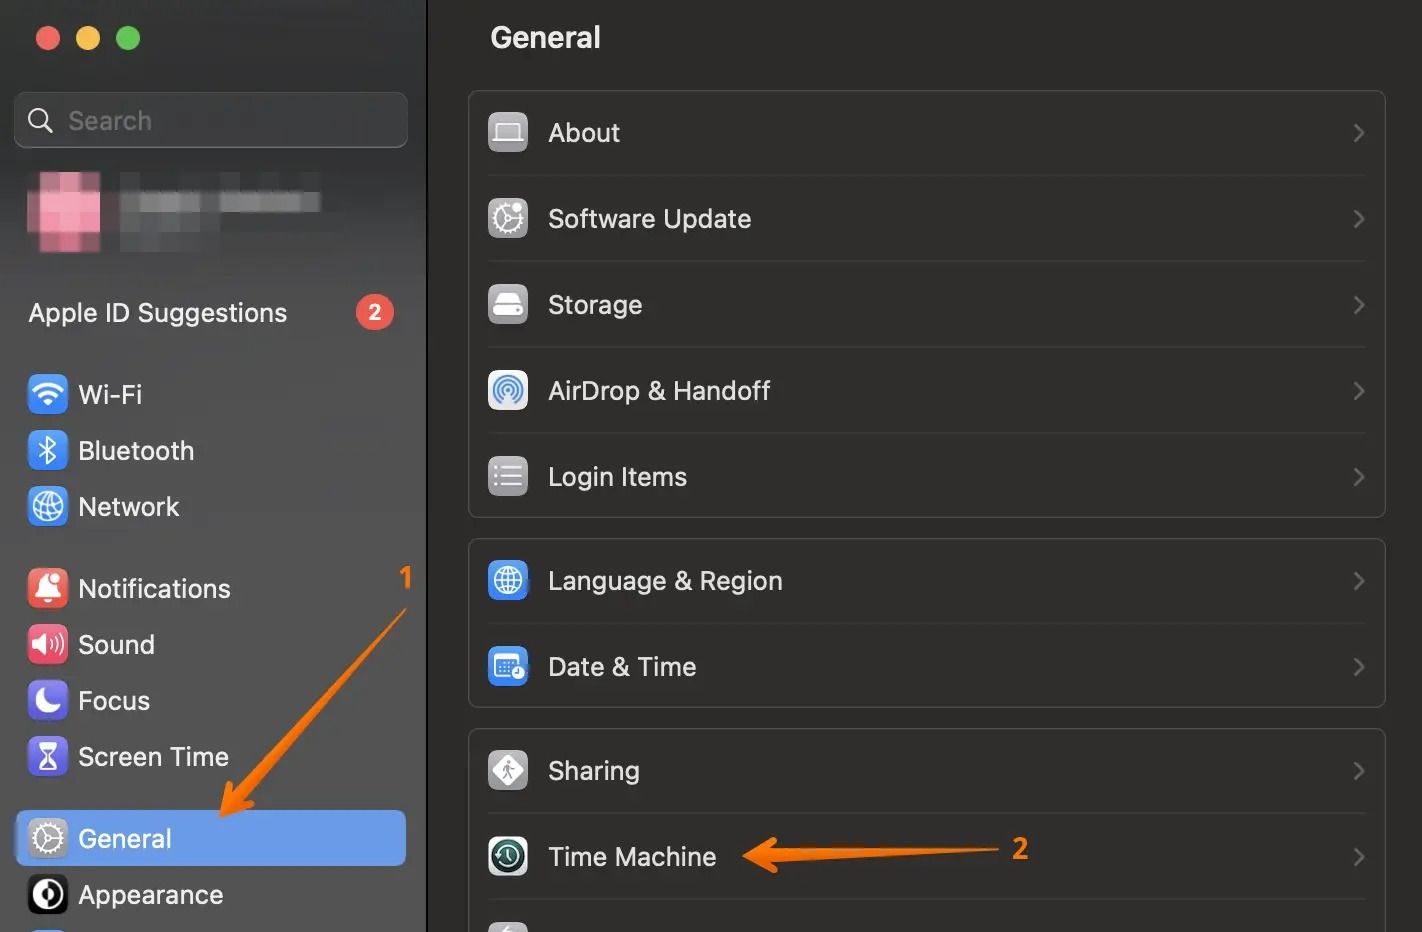 Open the Time Machine option in macOS